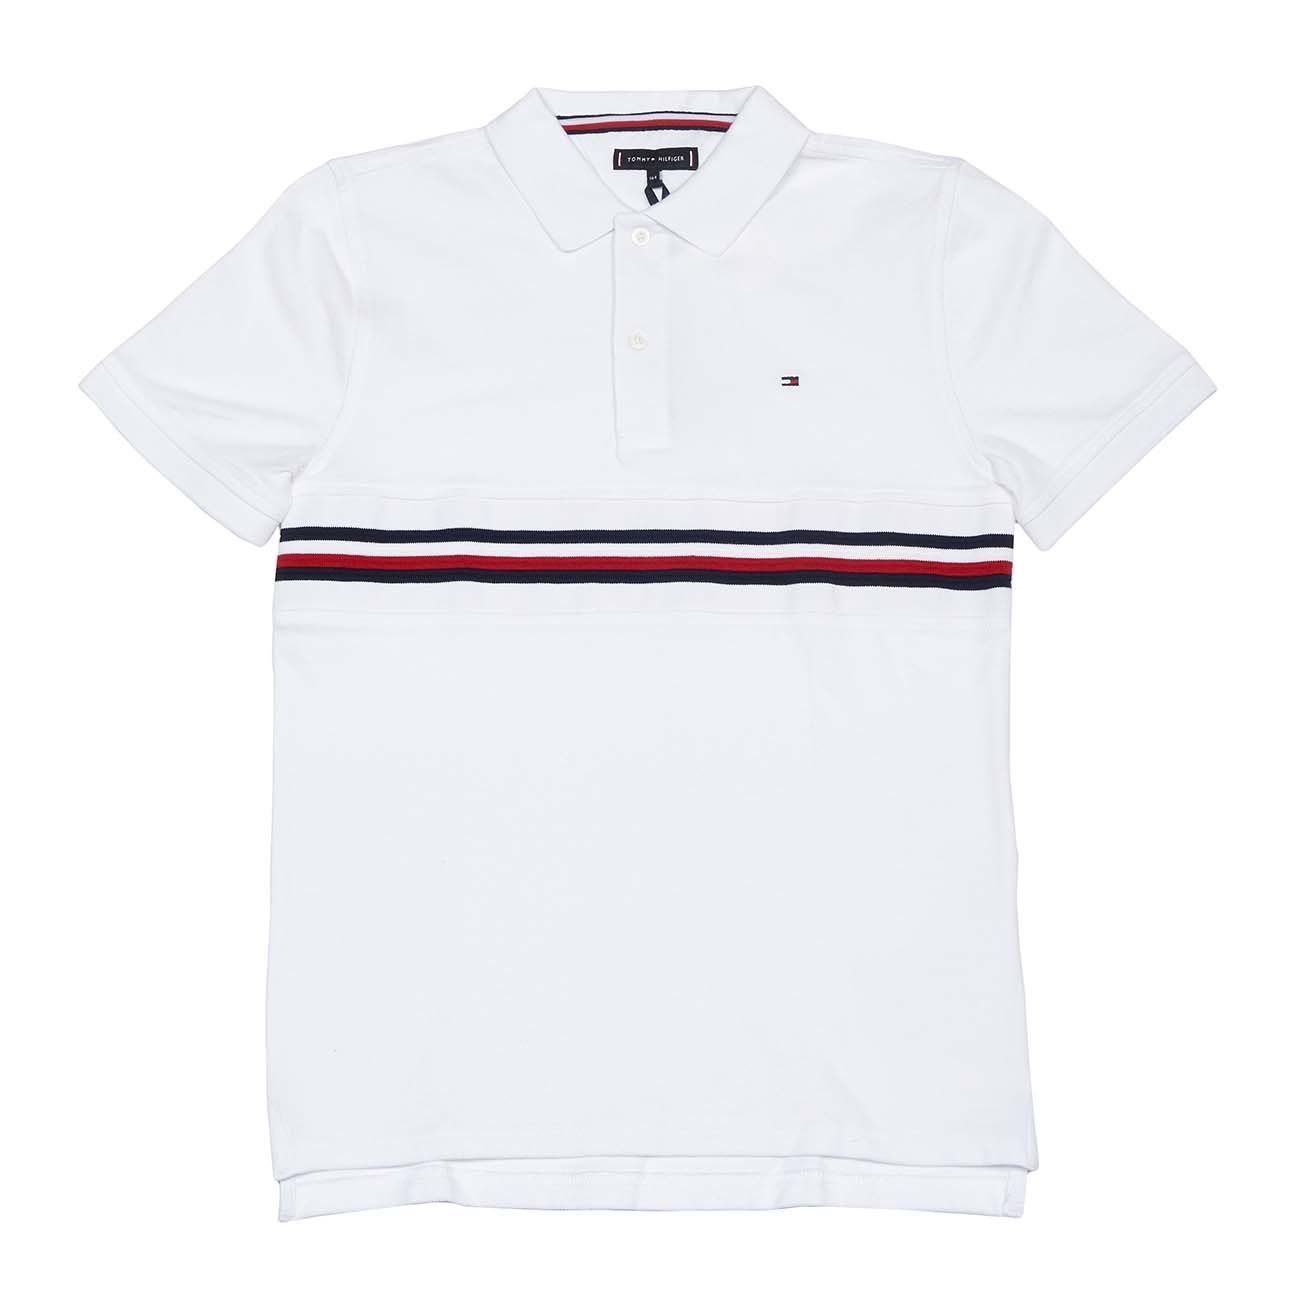 red white and blue tommy hilfiger polo